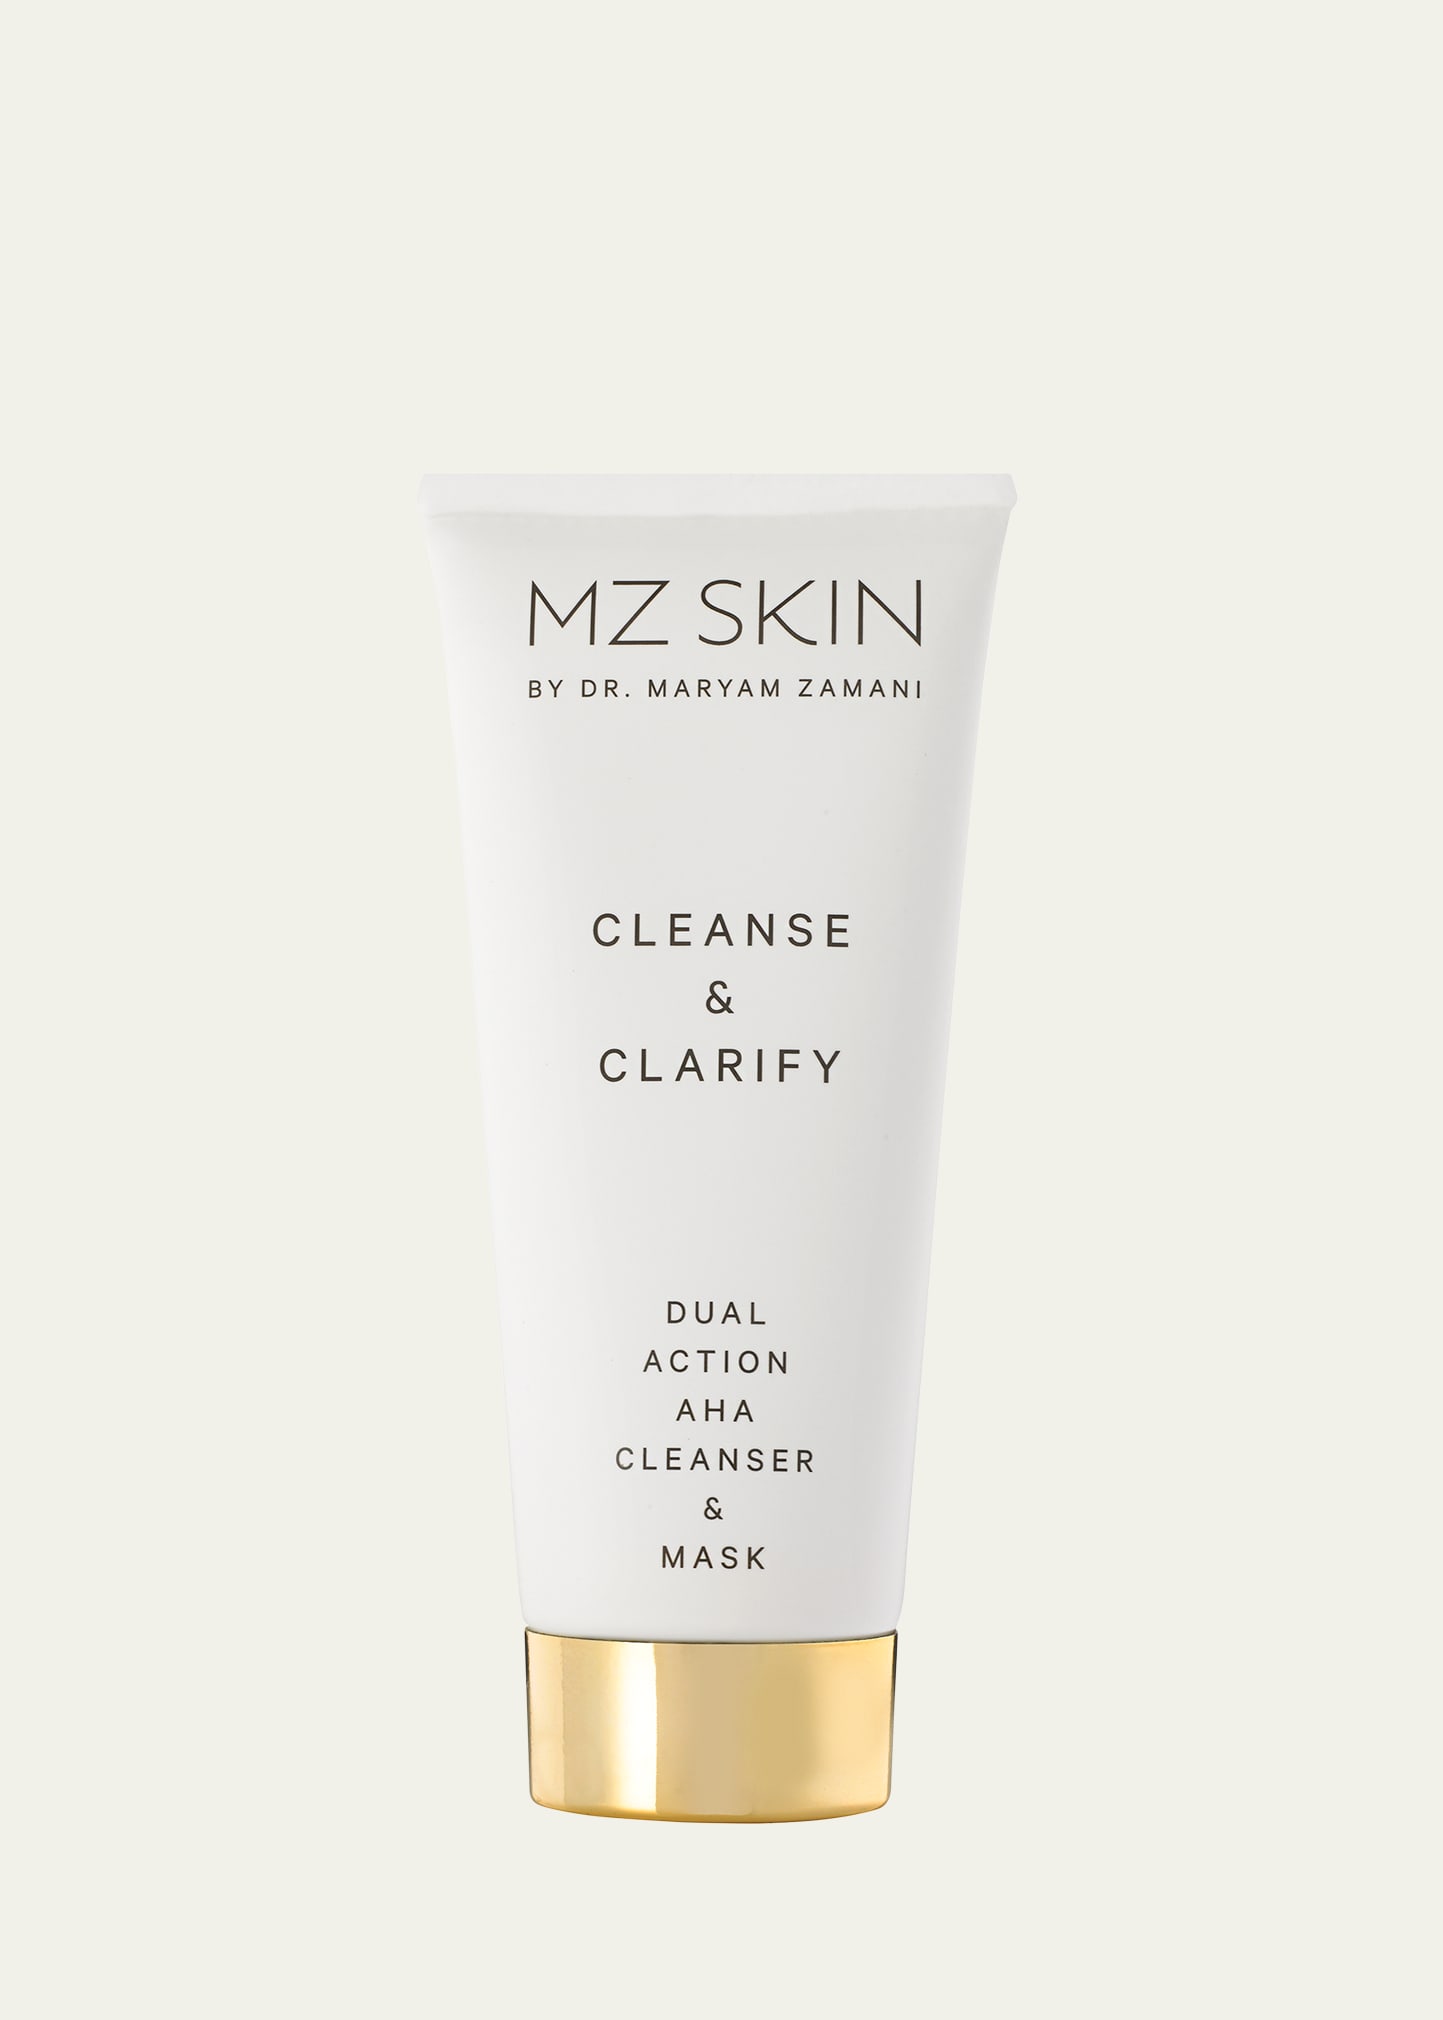 Cleanse and Clarify Dual Action AHA Cleanser and Mask, 3.4 oz.